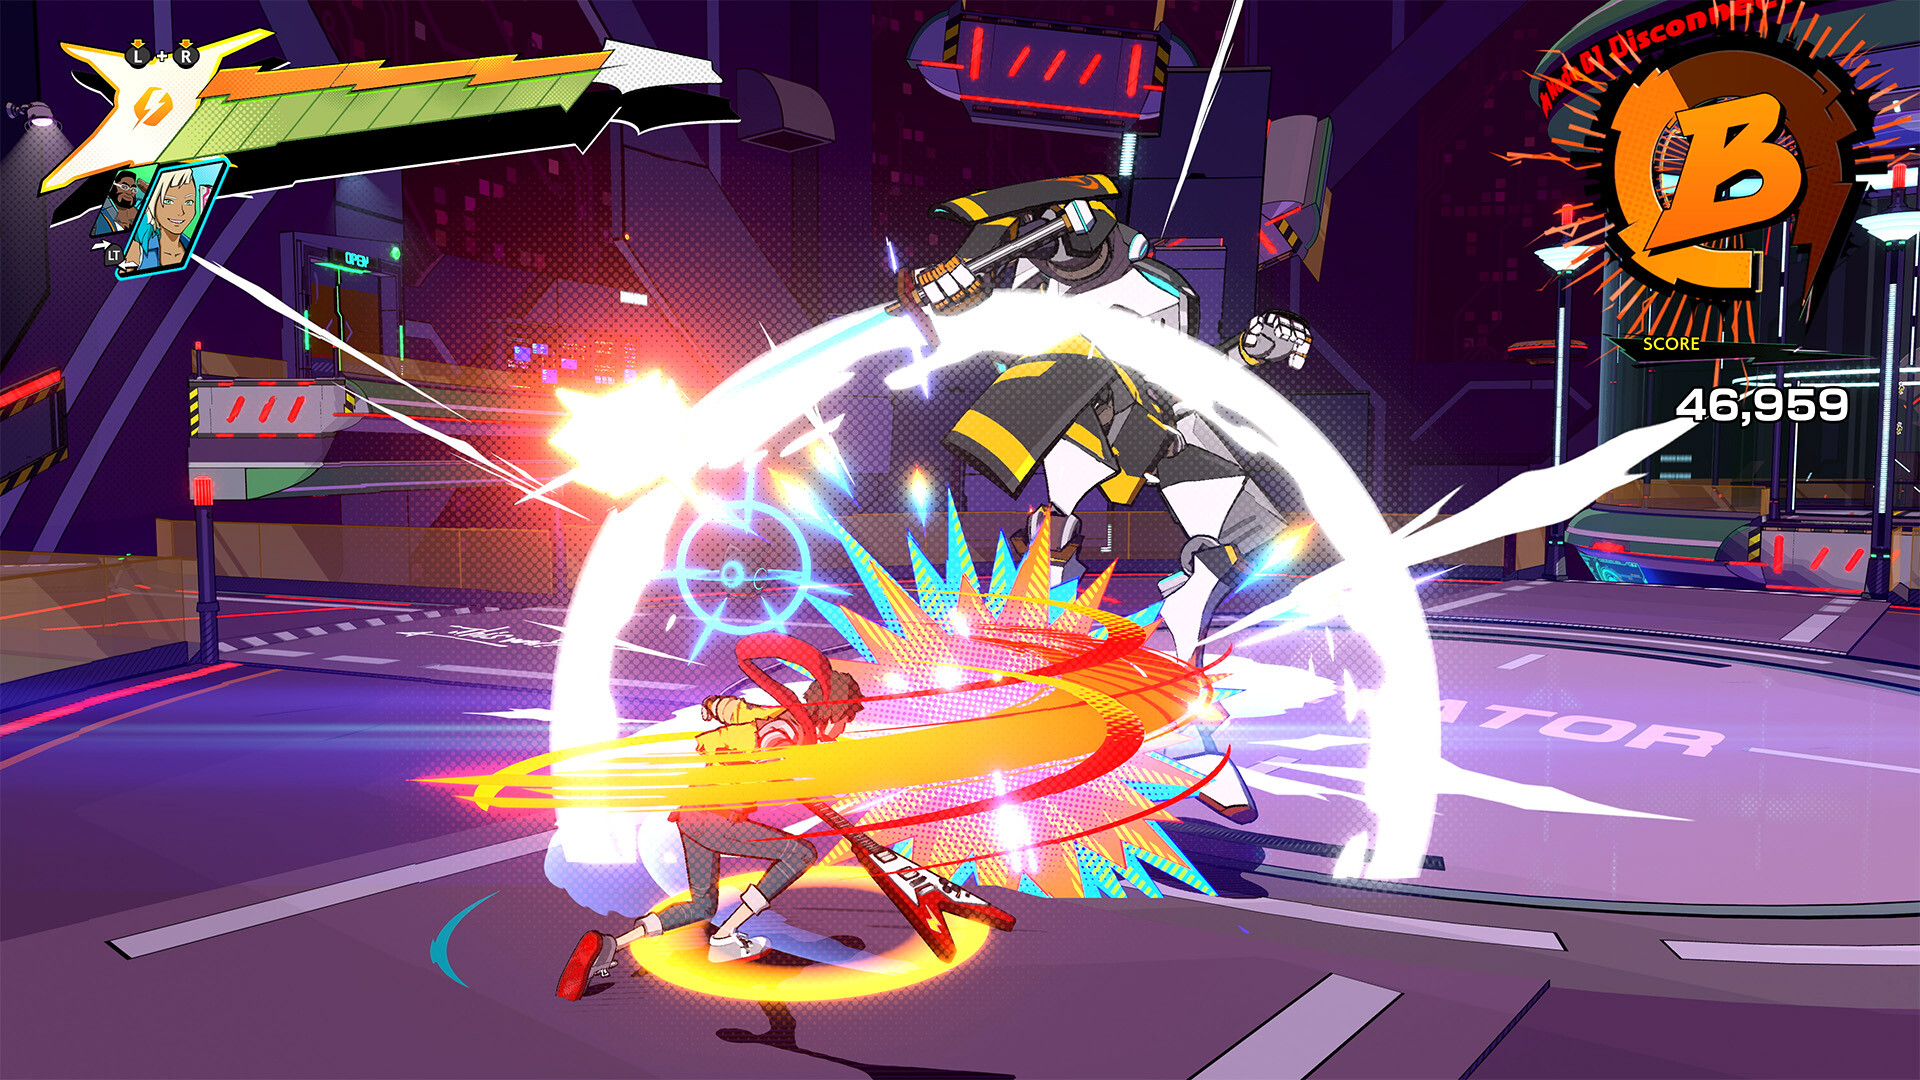 Hi-Fi Rush: Hands-on with a Surprising New Rhythm Action Game - CNET